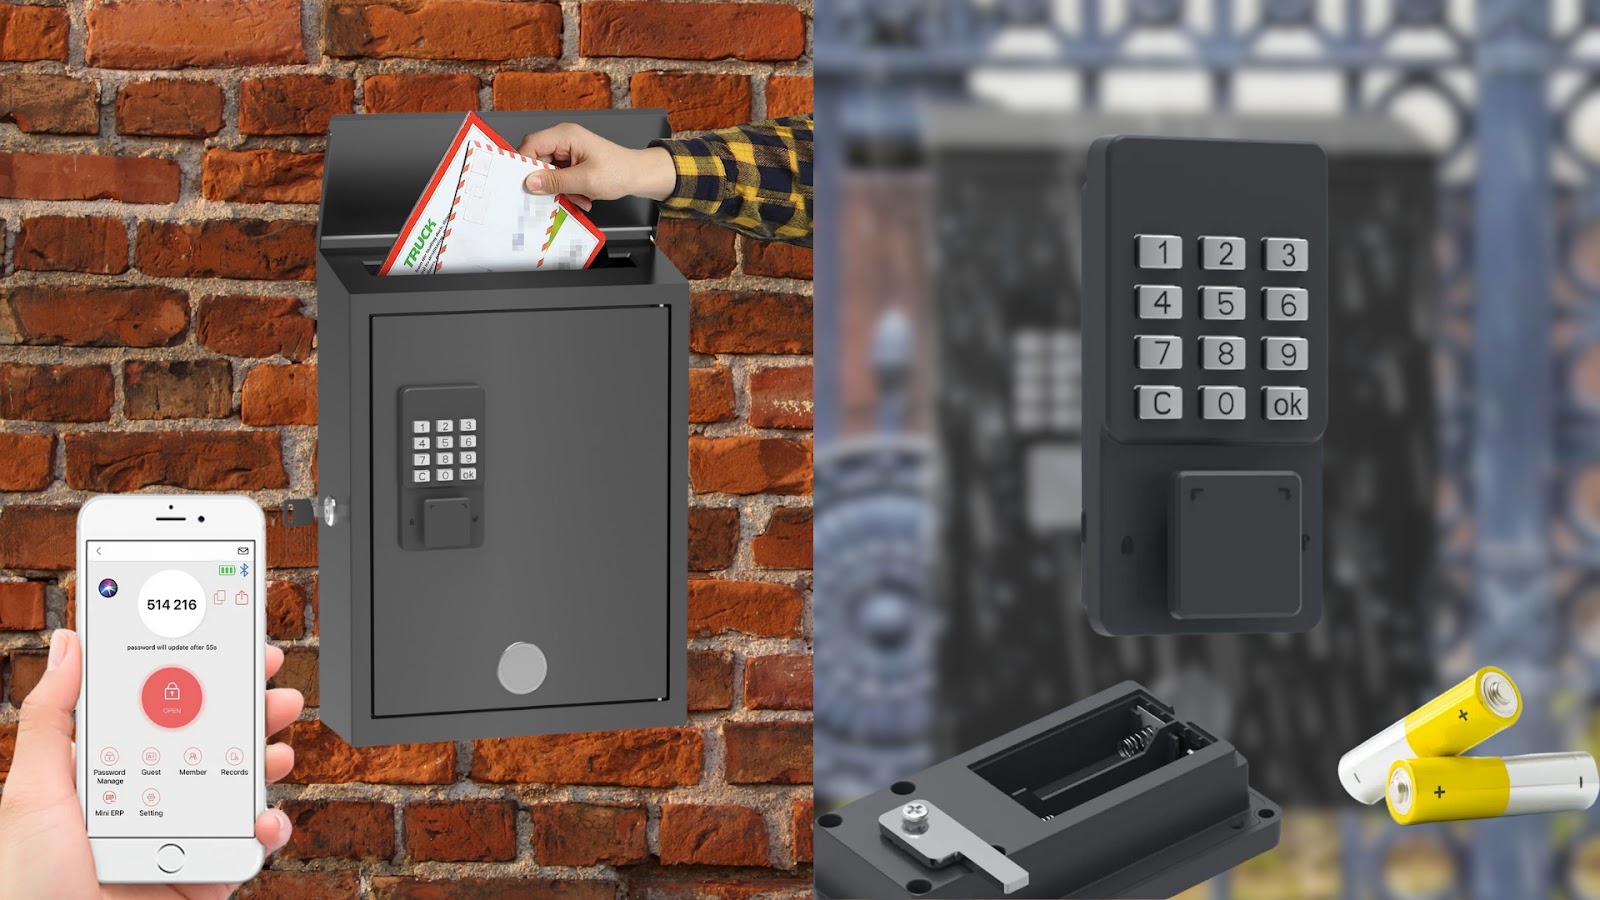 A battery-powered mailbox lock that can be unlocked with a phone app